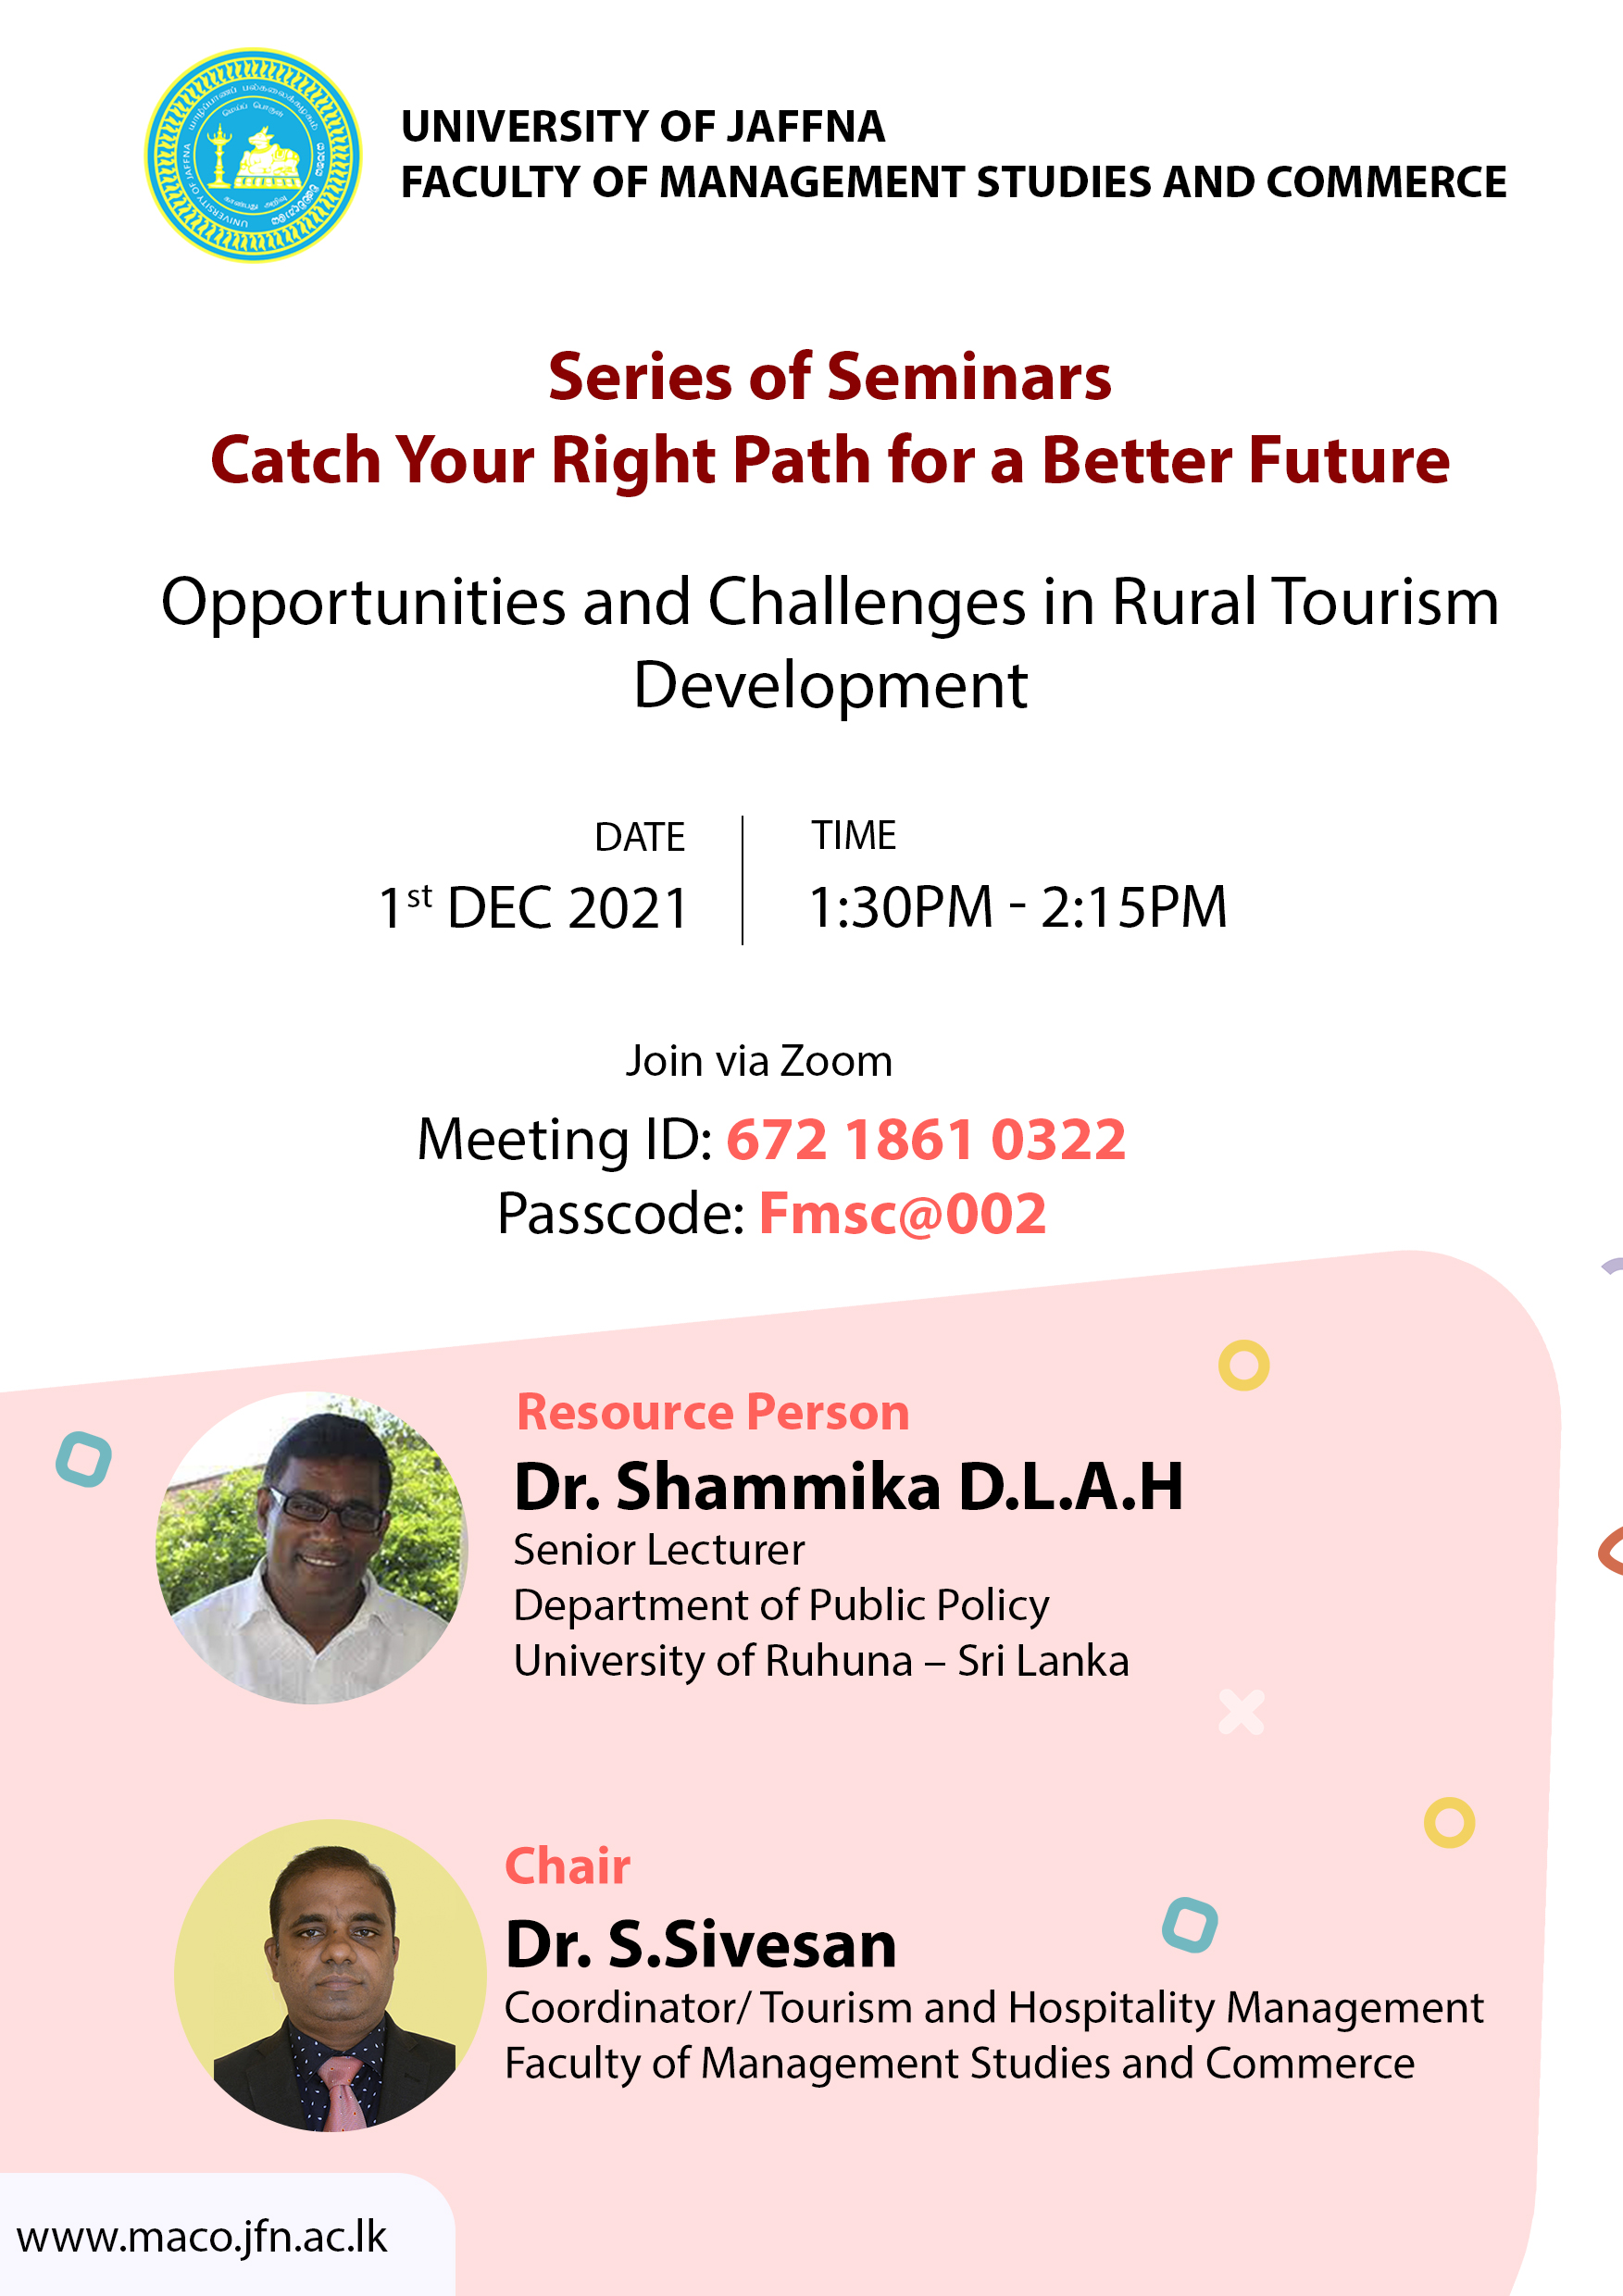 Opportunities and Challenges in Rural Tourism Development